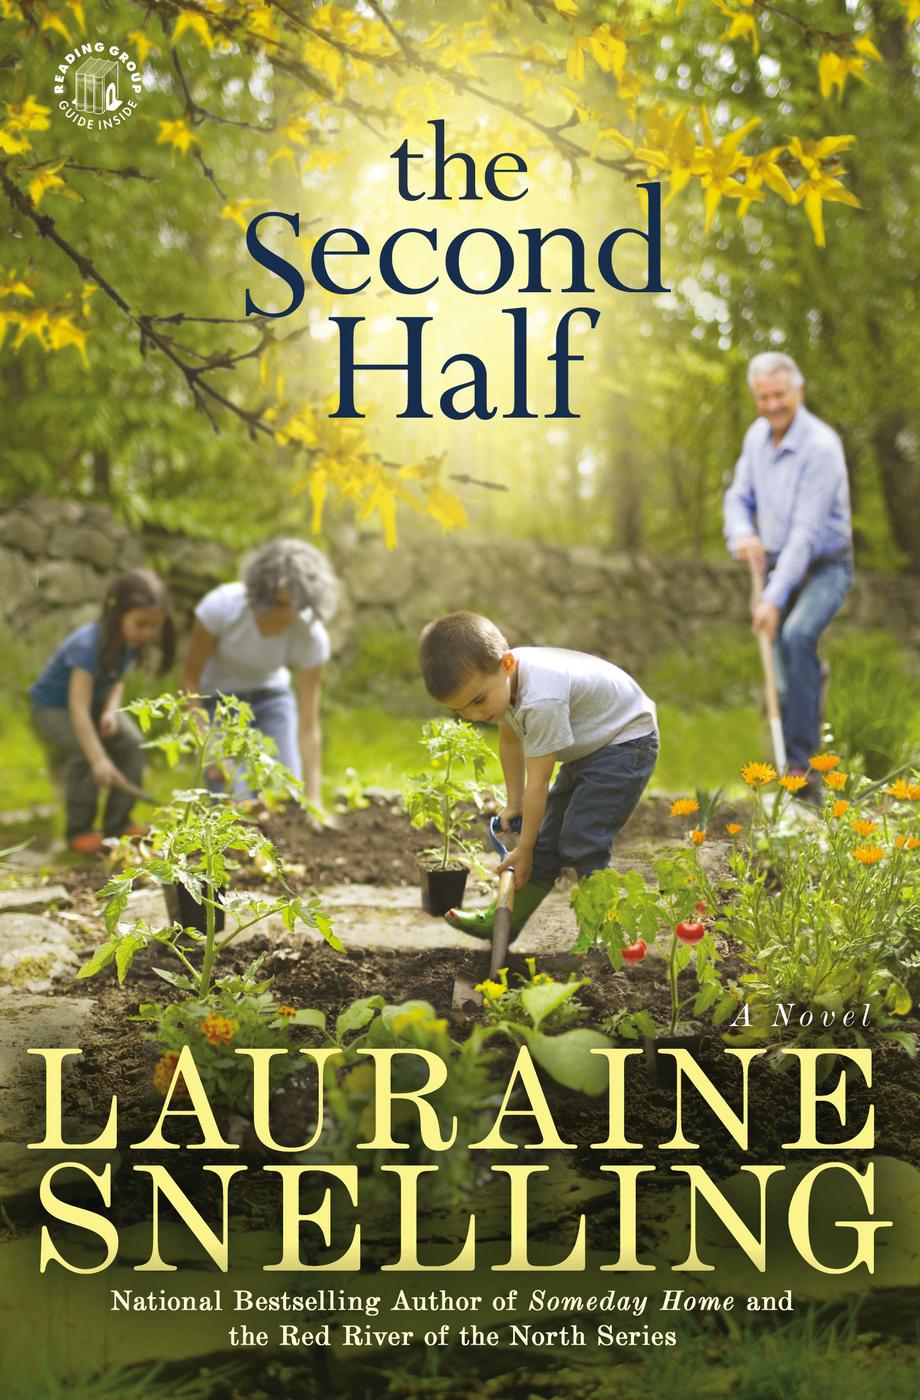 The Second Half (2016) by Lauraine Snelling